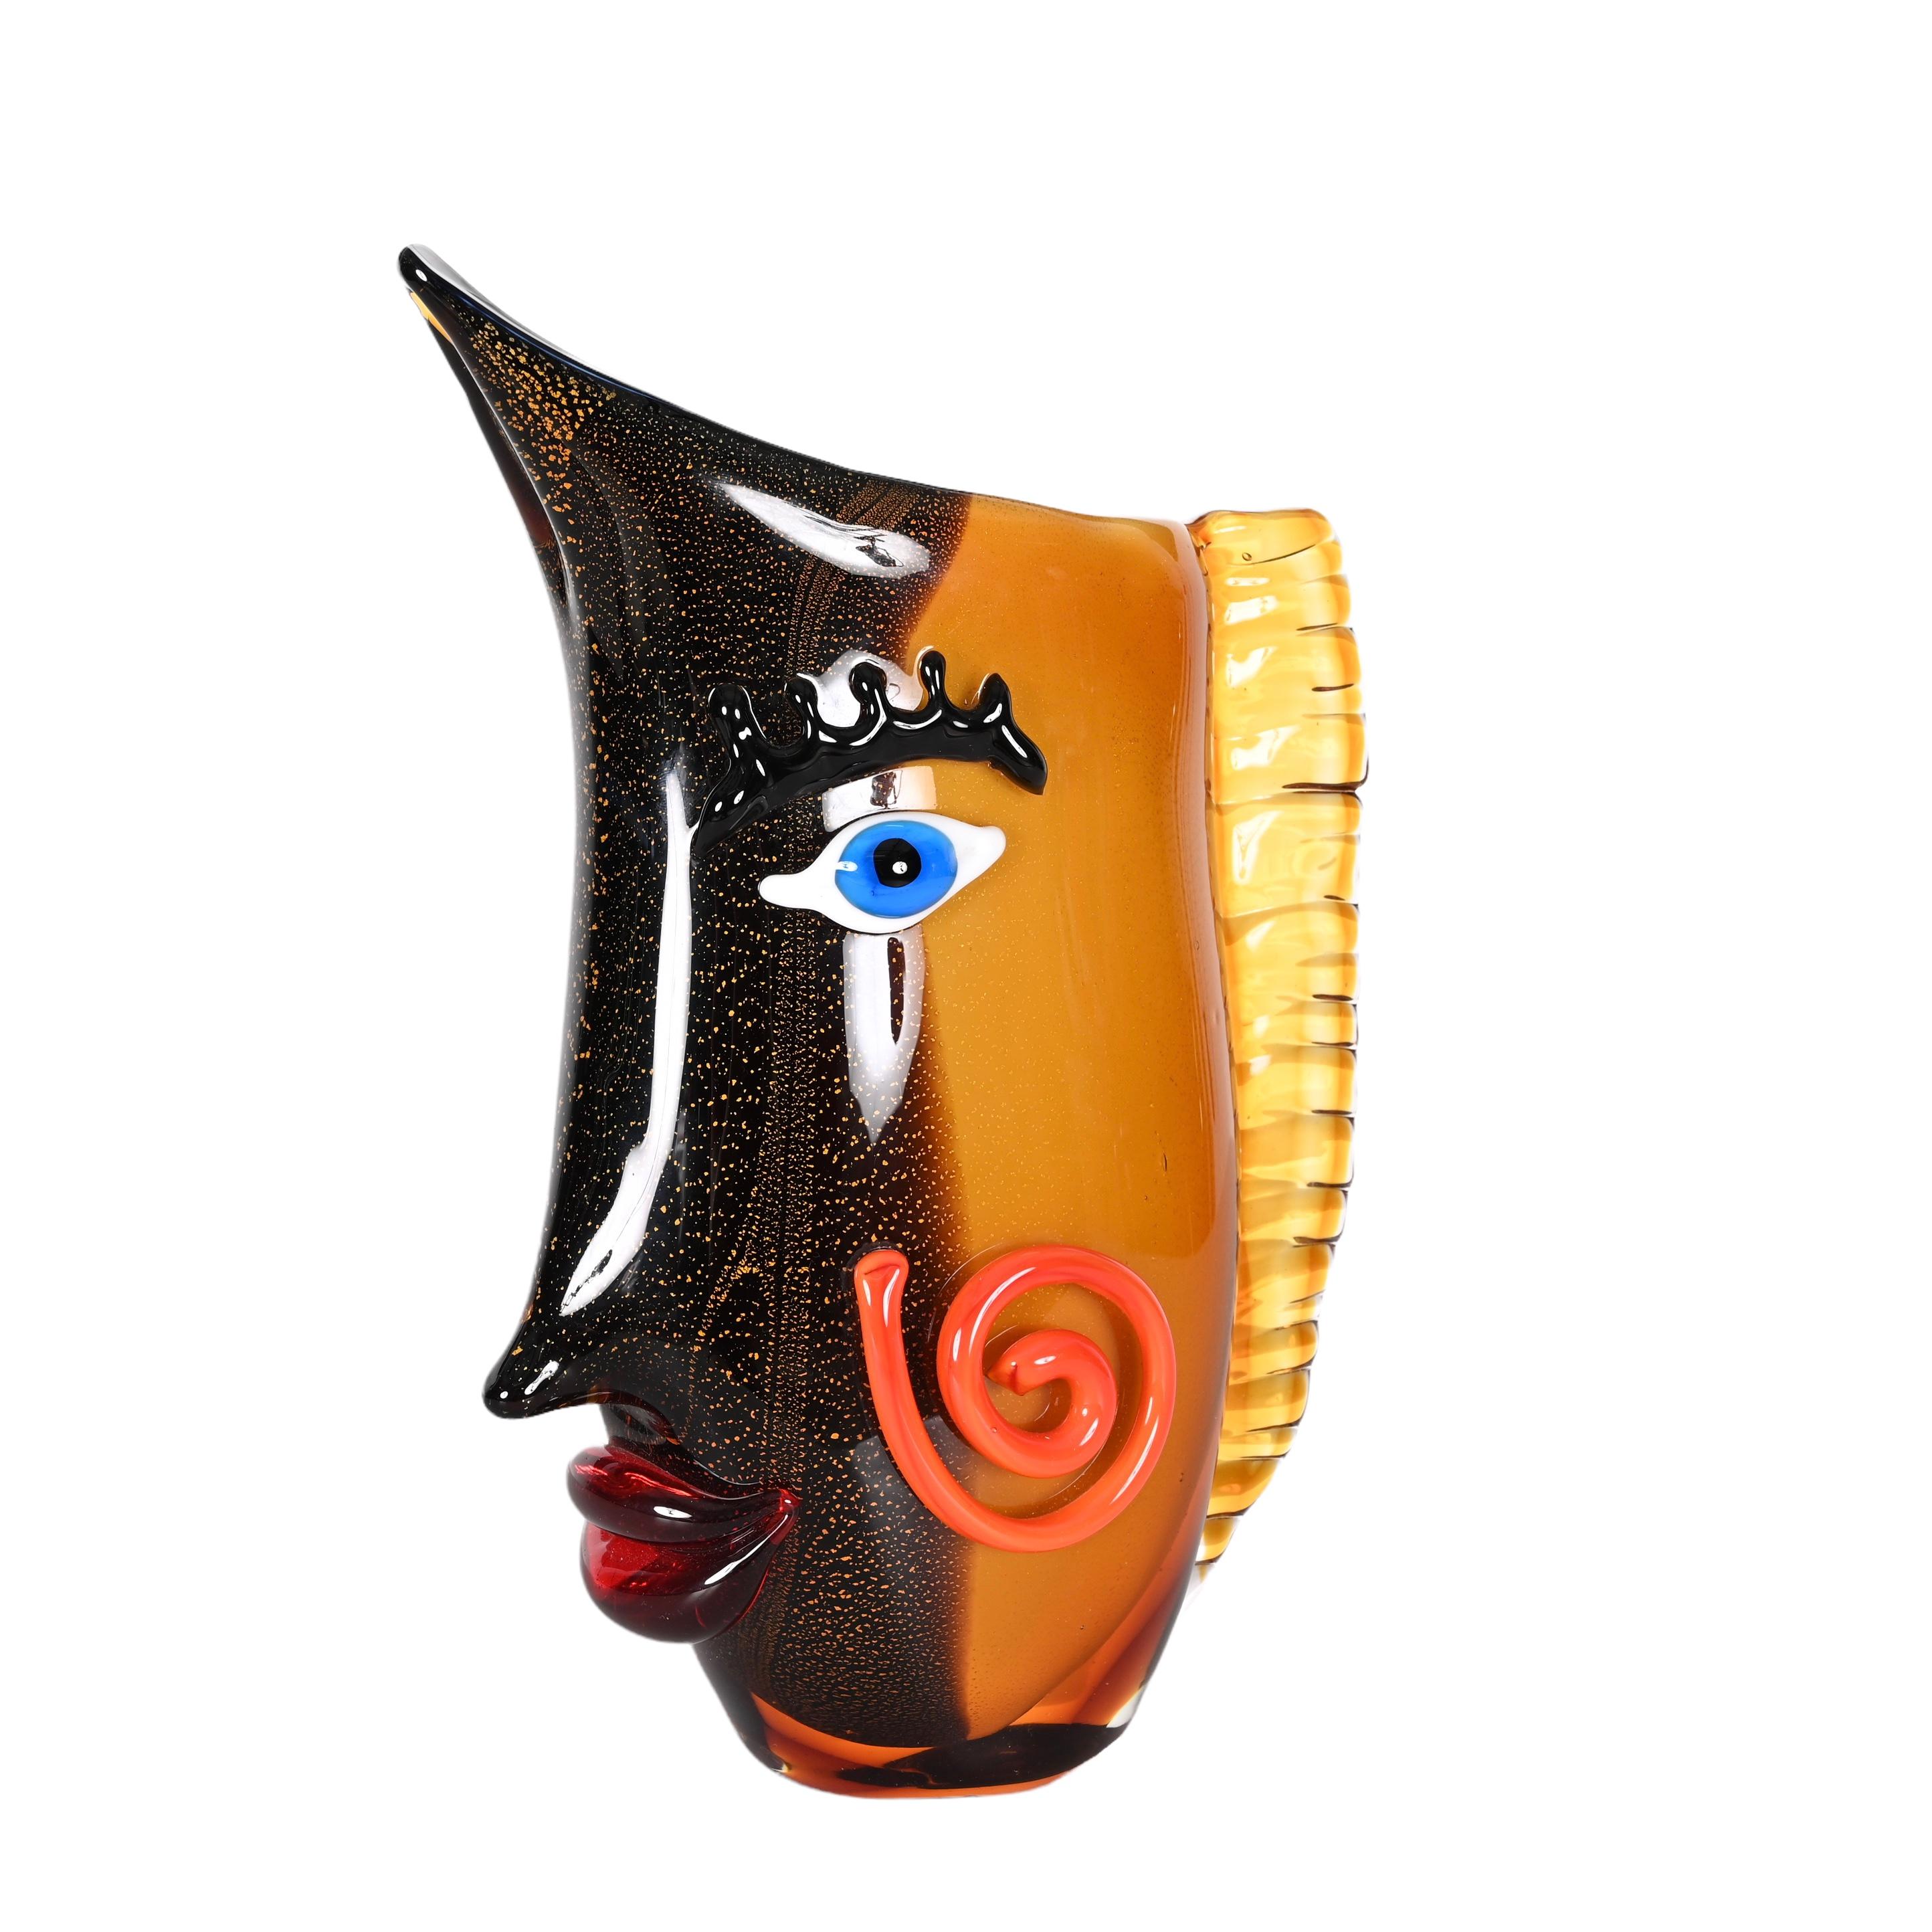 Mario Badioli after Picasso Black and Orange Sommerso Murano Glass Vase, 1980s For Sale 4